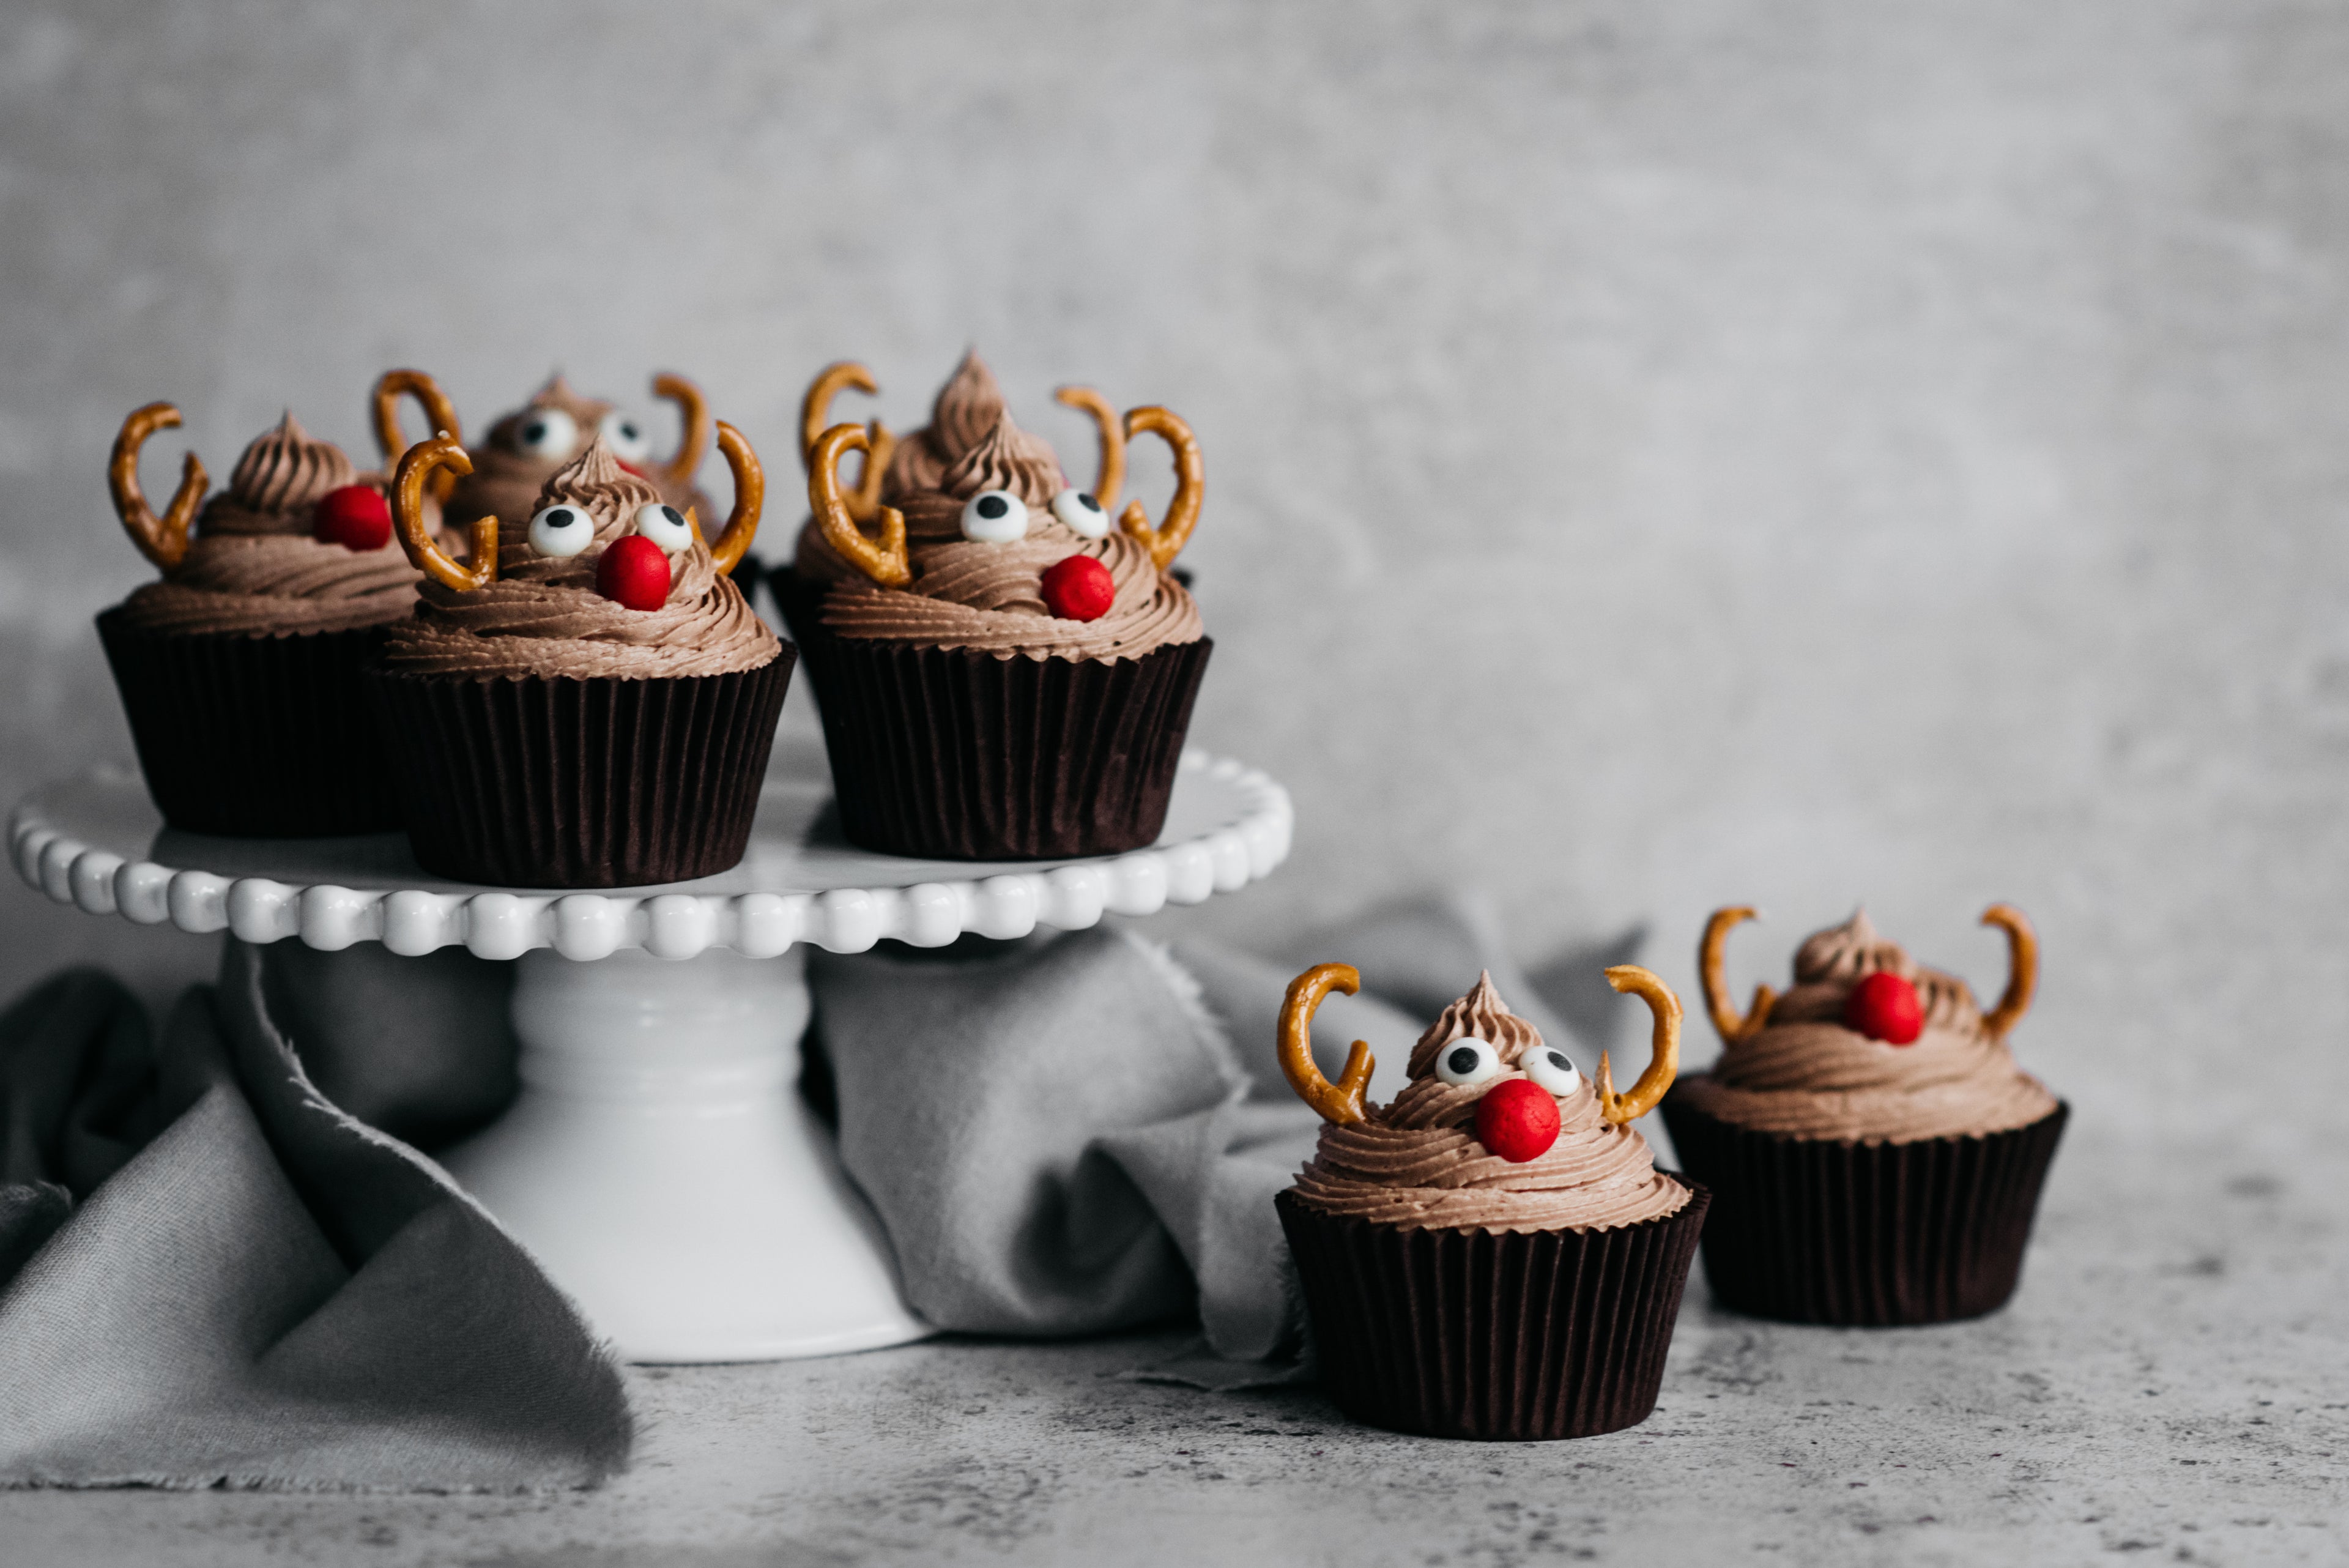 Reindeer Cupcakes on a cake stand, with cupcakes next to it decorated with pretzel antlers and red sweetie noses